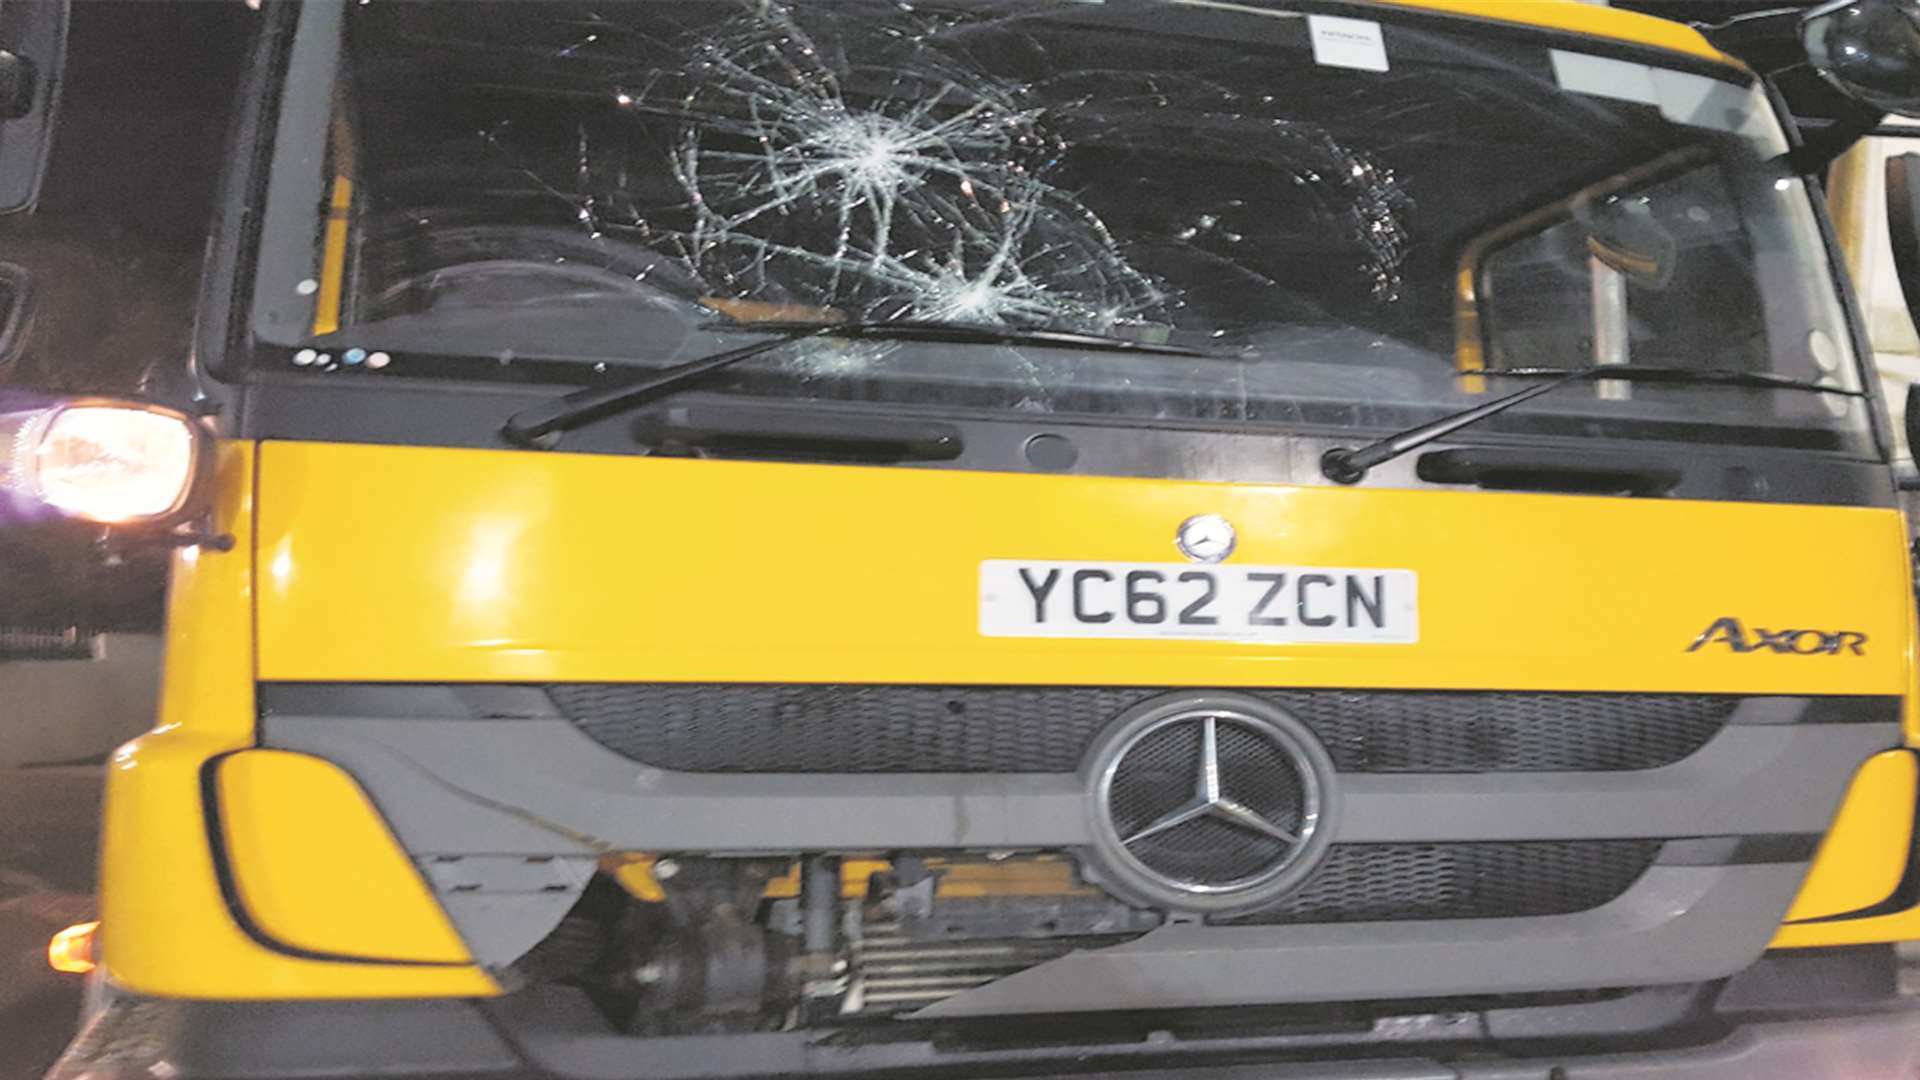 The driver escaped injury when an object hit the windscreen